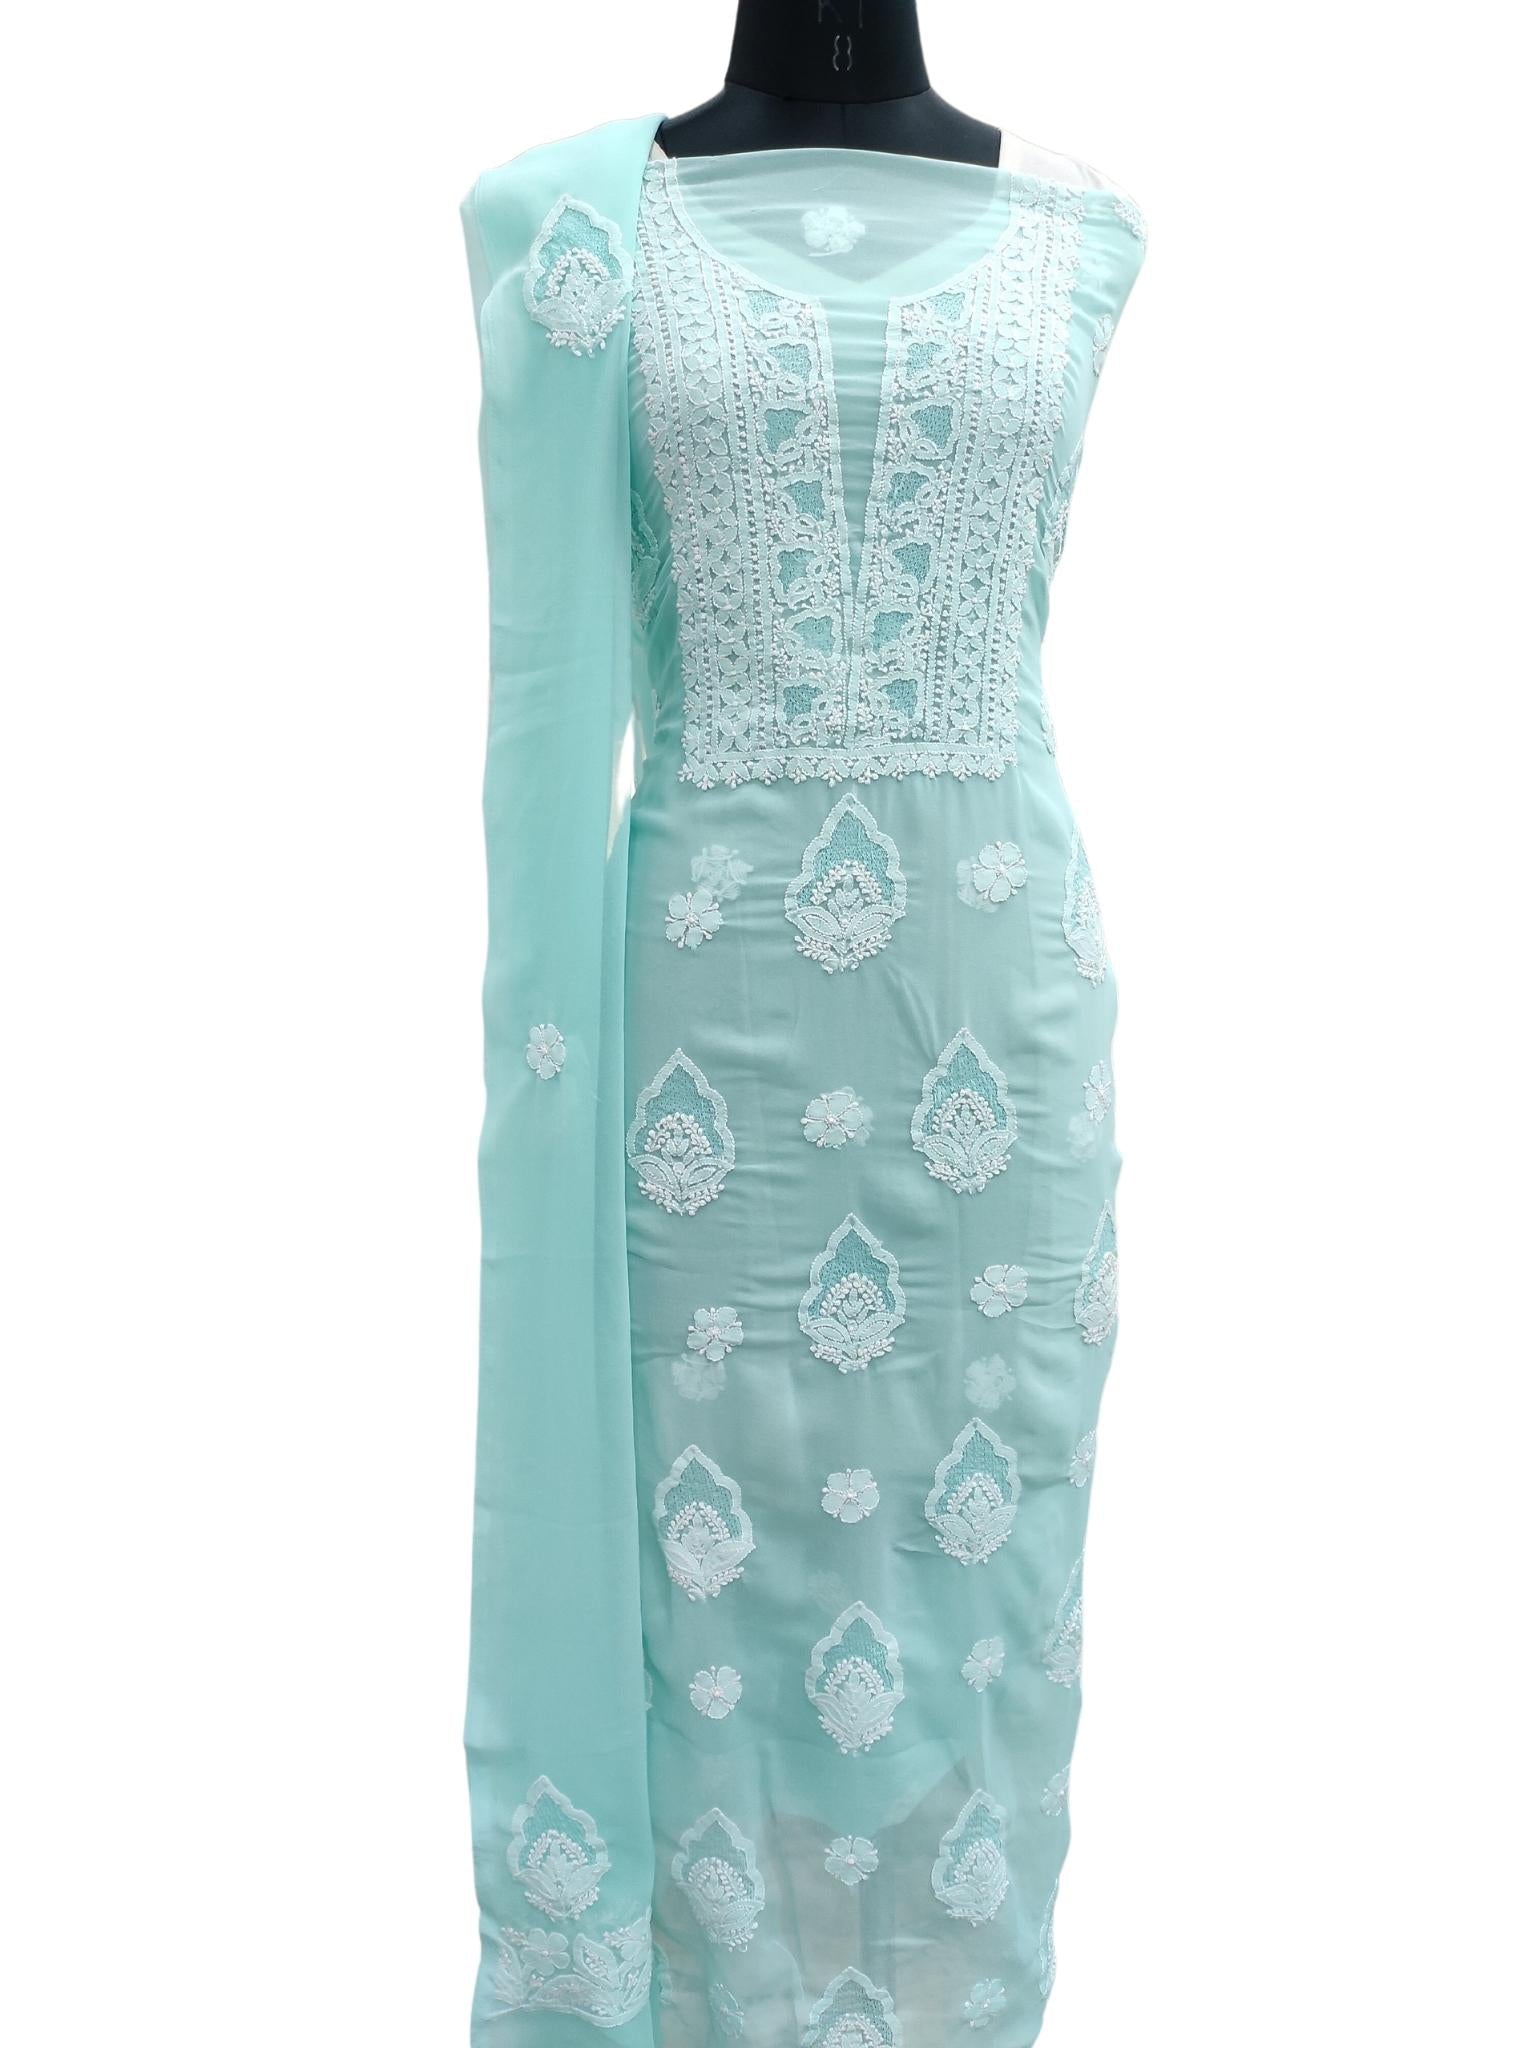 Shyamal Chikan Hand Embroidered High Quality Sea Green Georgette Lucknowi Chikankari Unstitched Suit Piece with Jaali Work - S18291